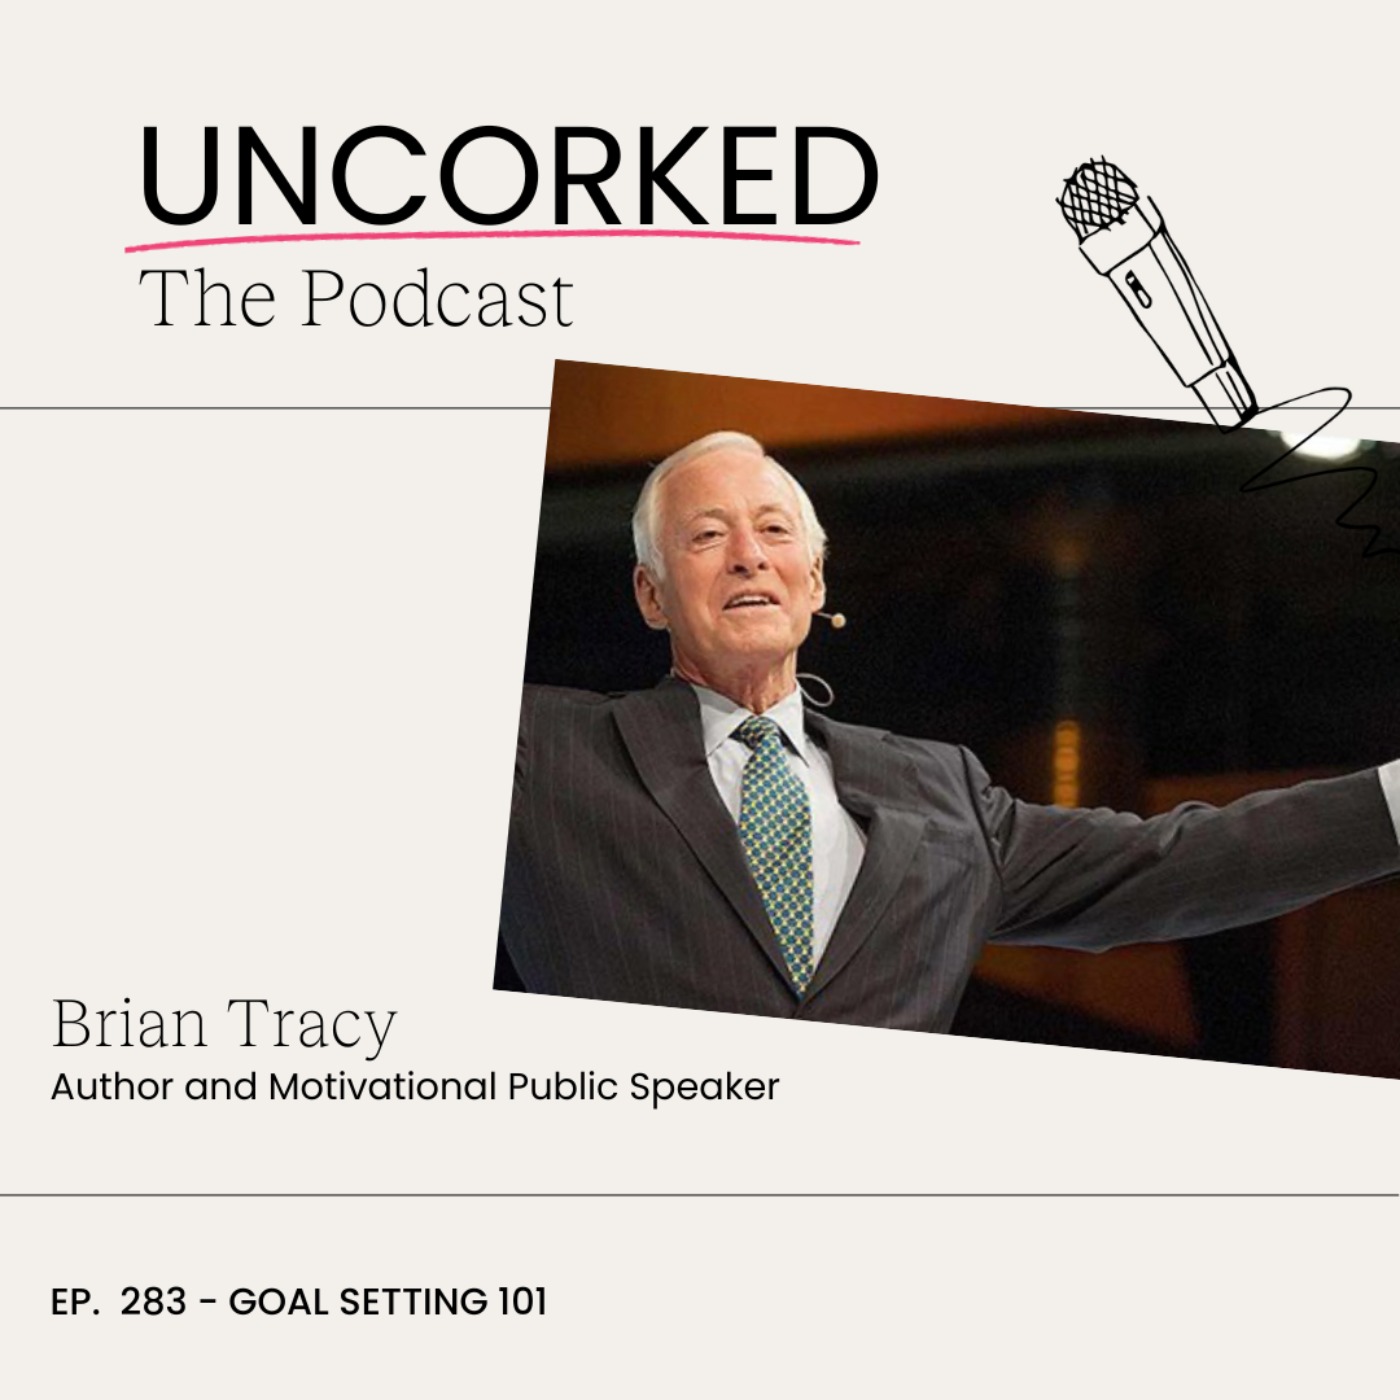 Goal Setting 101 with Brian Tracy